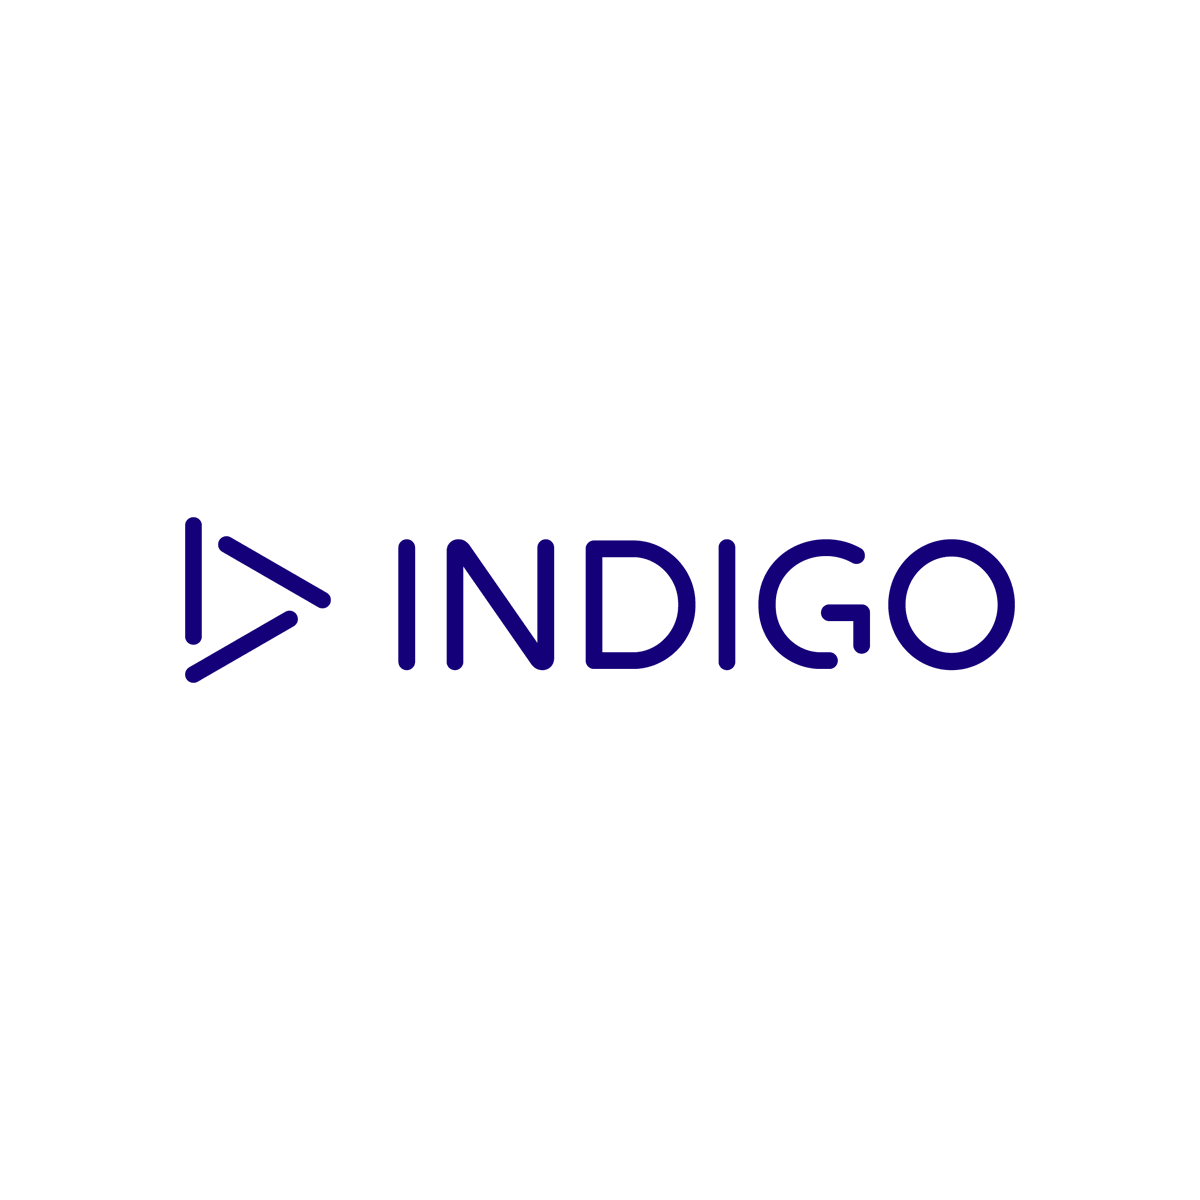 In 2021 Indigo launched their refreshed brand. Collaborating with their teams and global customers, we crafted a brand strategy and verbal and visual identity reflecting their broadened abilities across data centres, fibre, 5G, and network services: bit.ly/3IH9JI